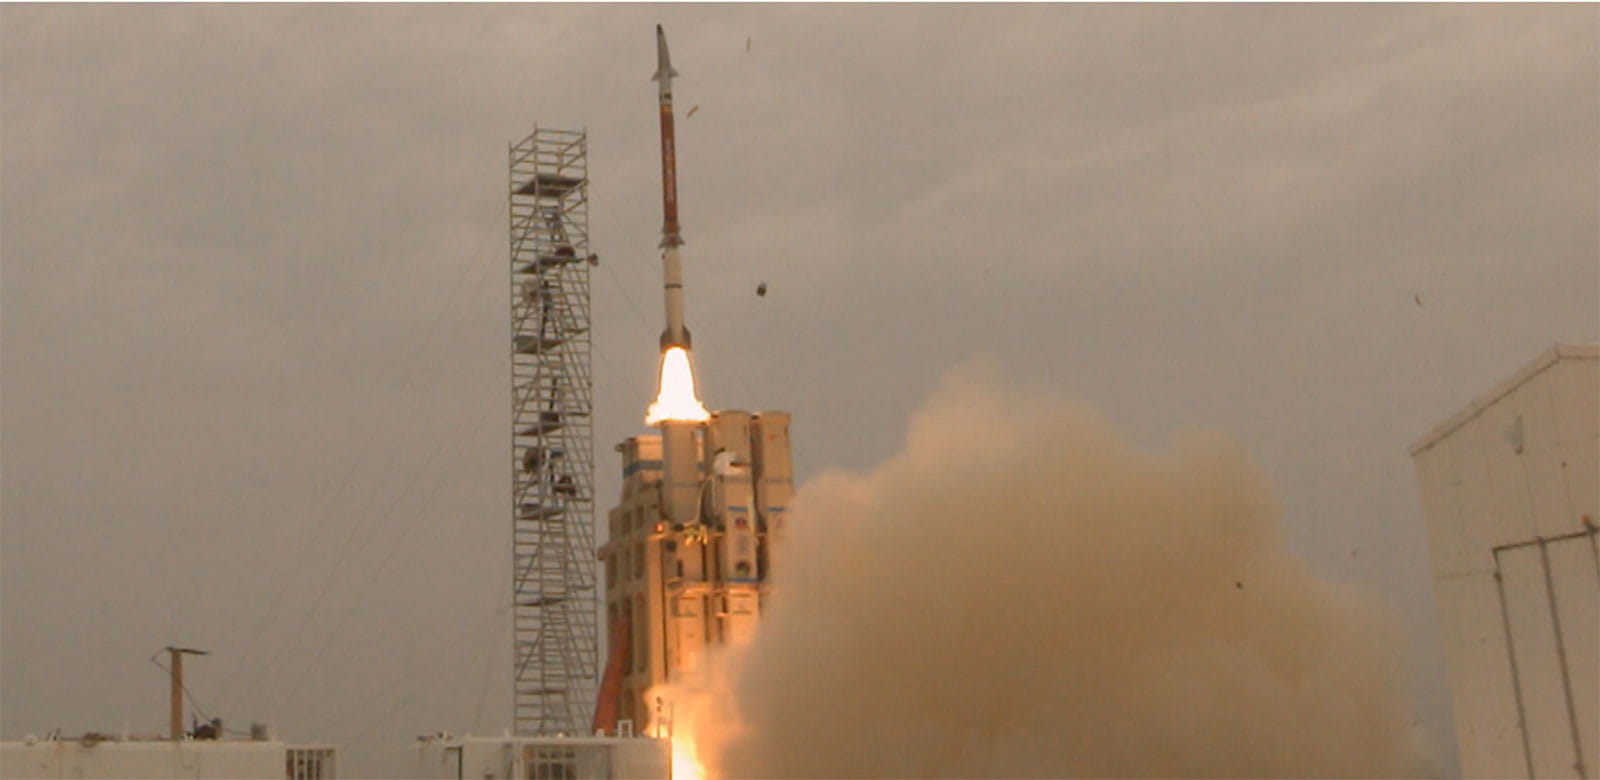 Missile being launched vertically from a launch pad.